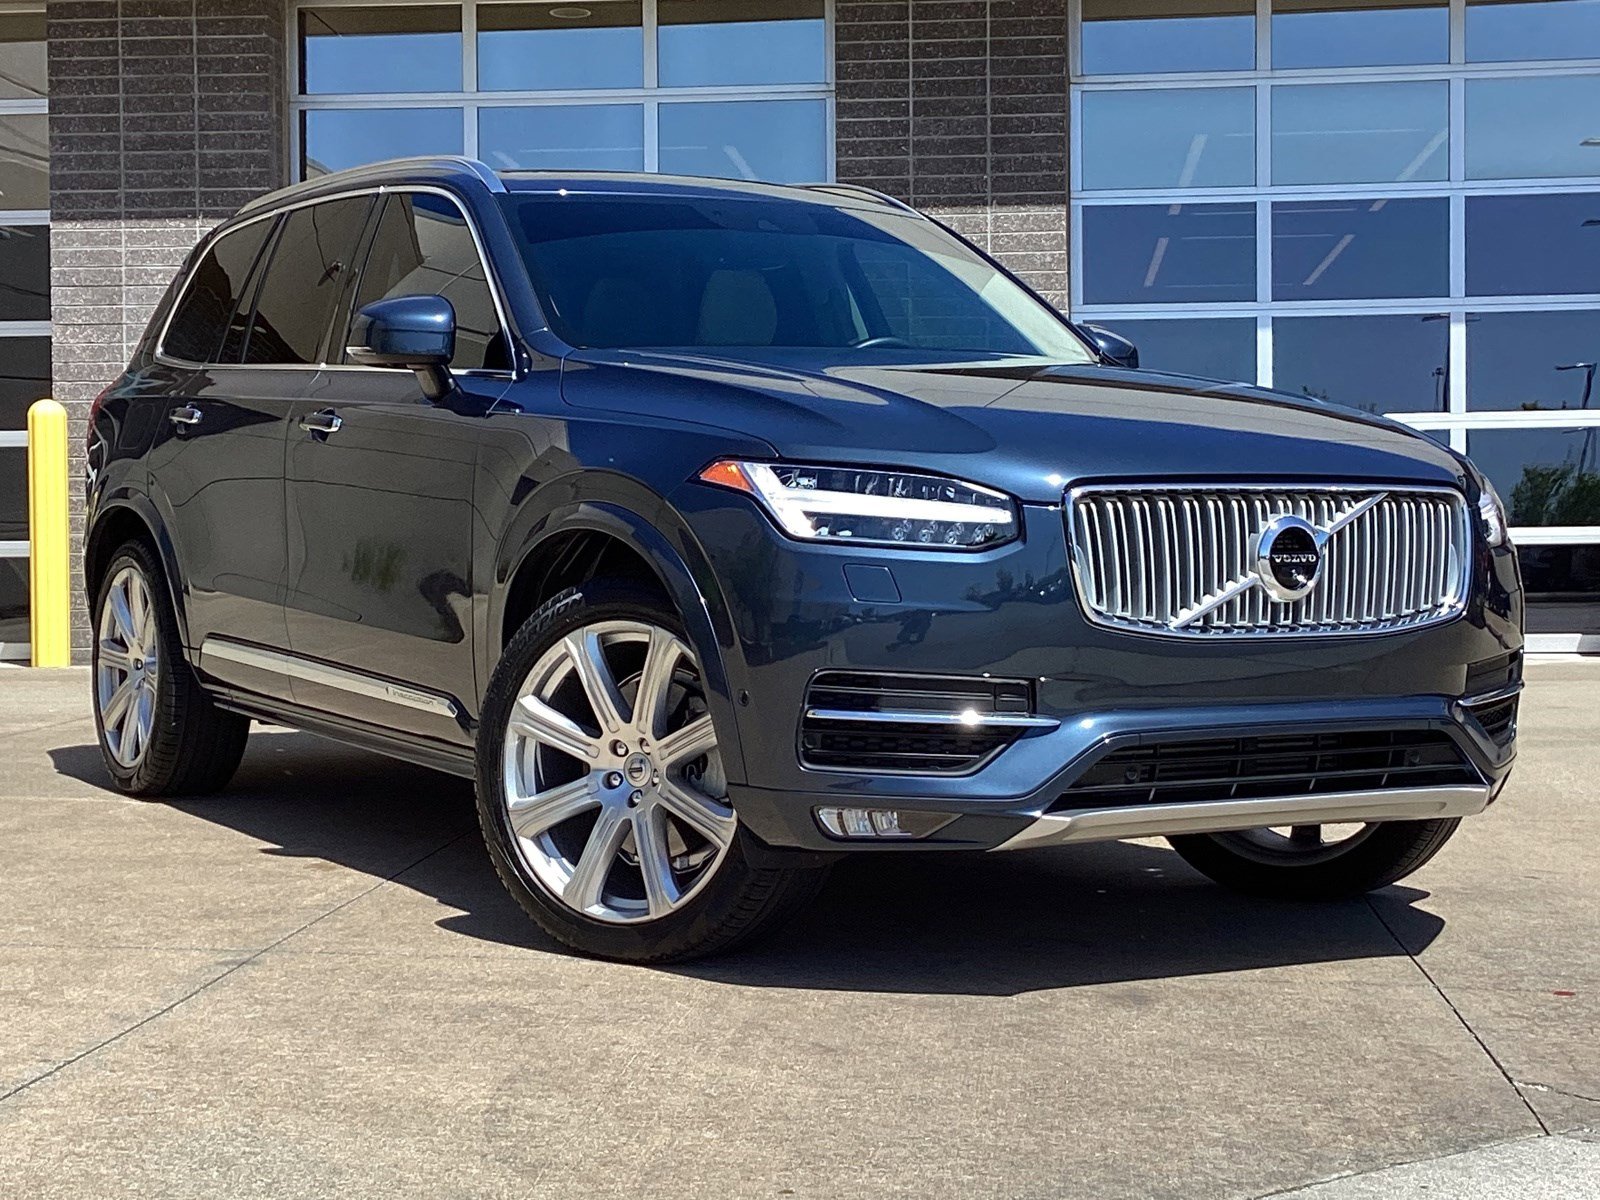 Pre-Owned 2019 Volvo XC90 Inscription SUV in Cary #Q28413B | Hendrick Dodge  Cary